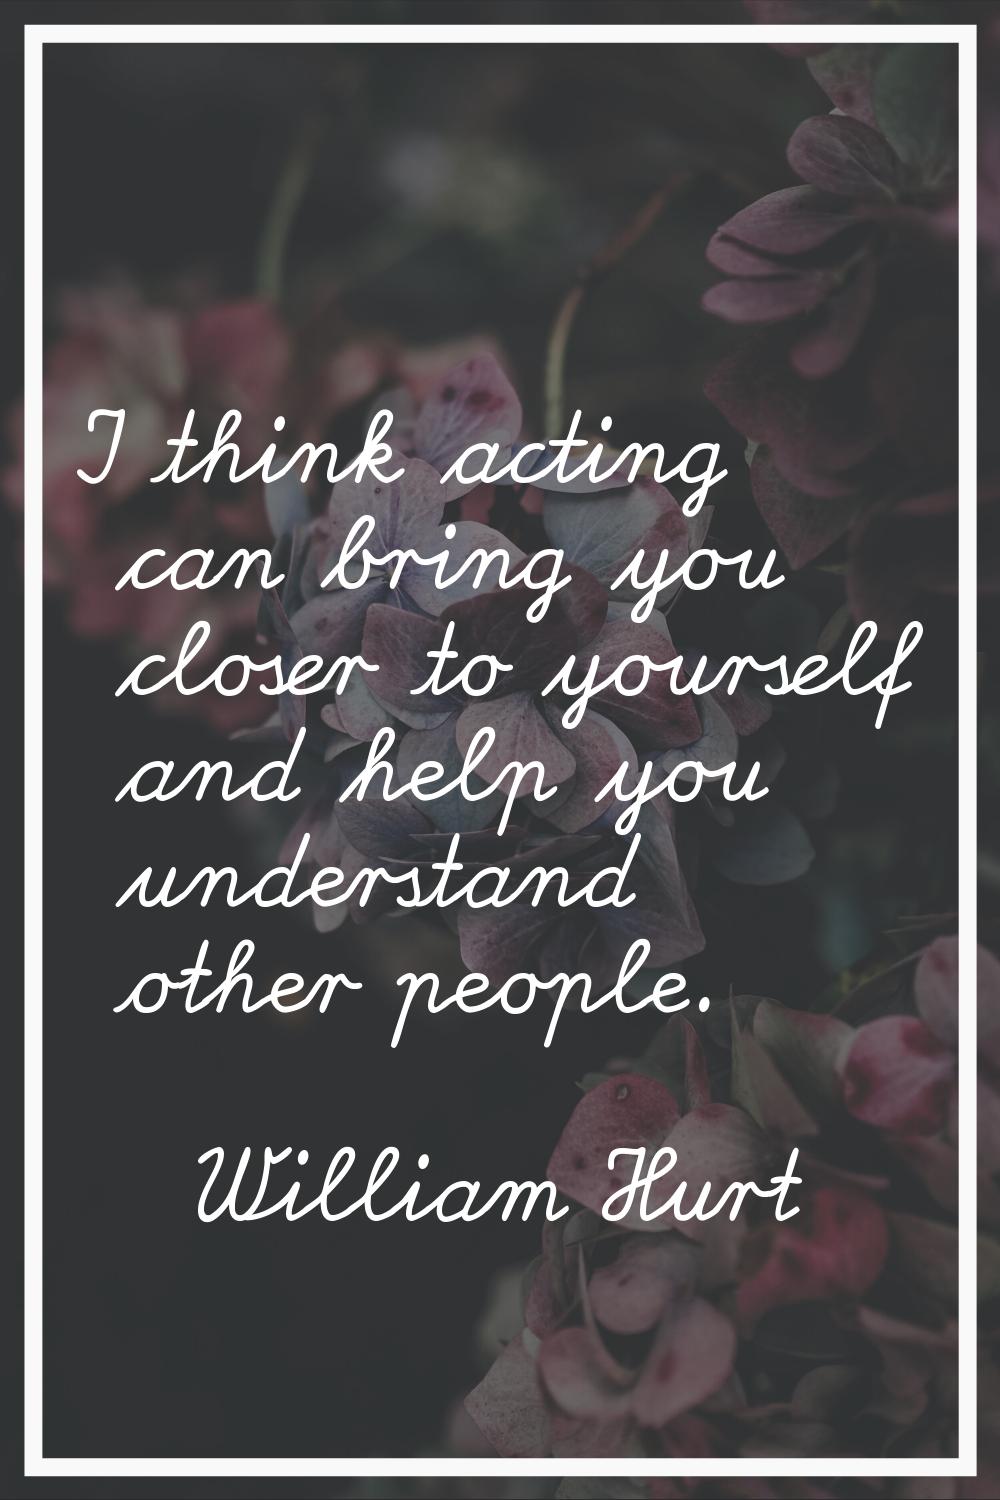 I think acting can bring you closer to yourself and help you understand other people.